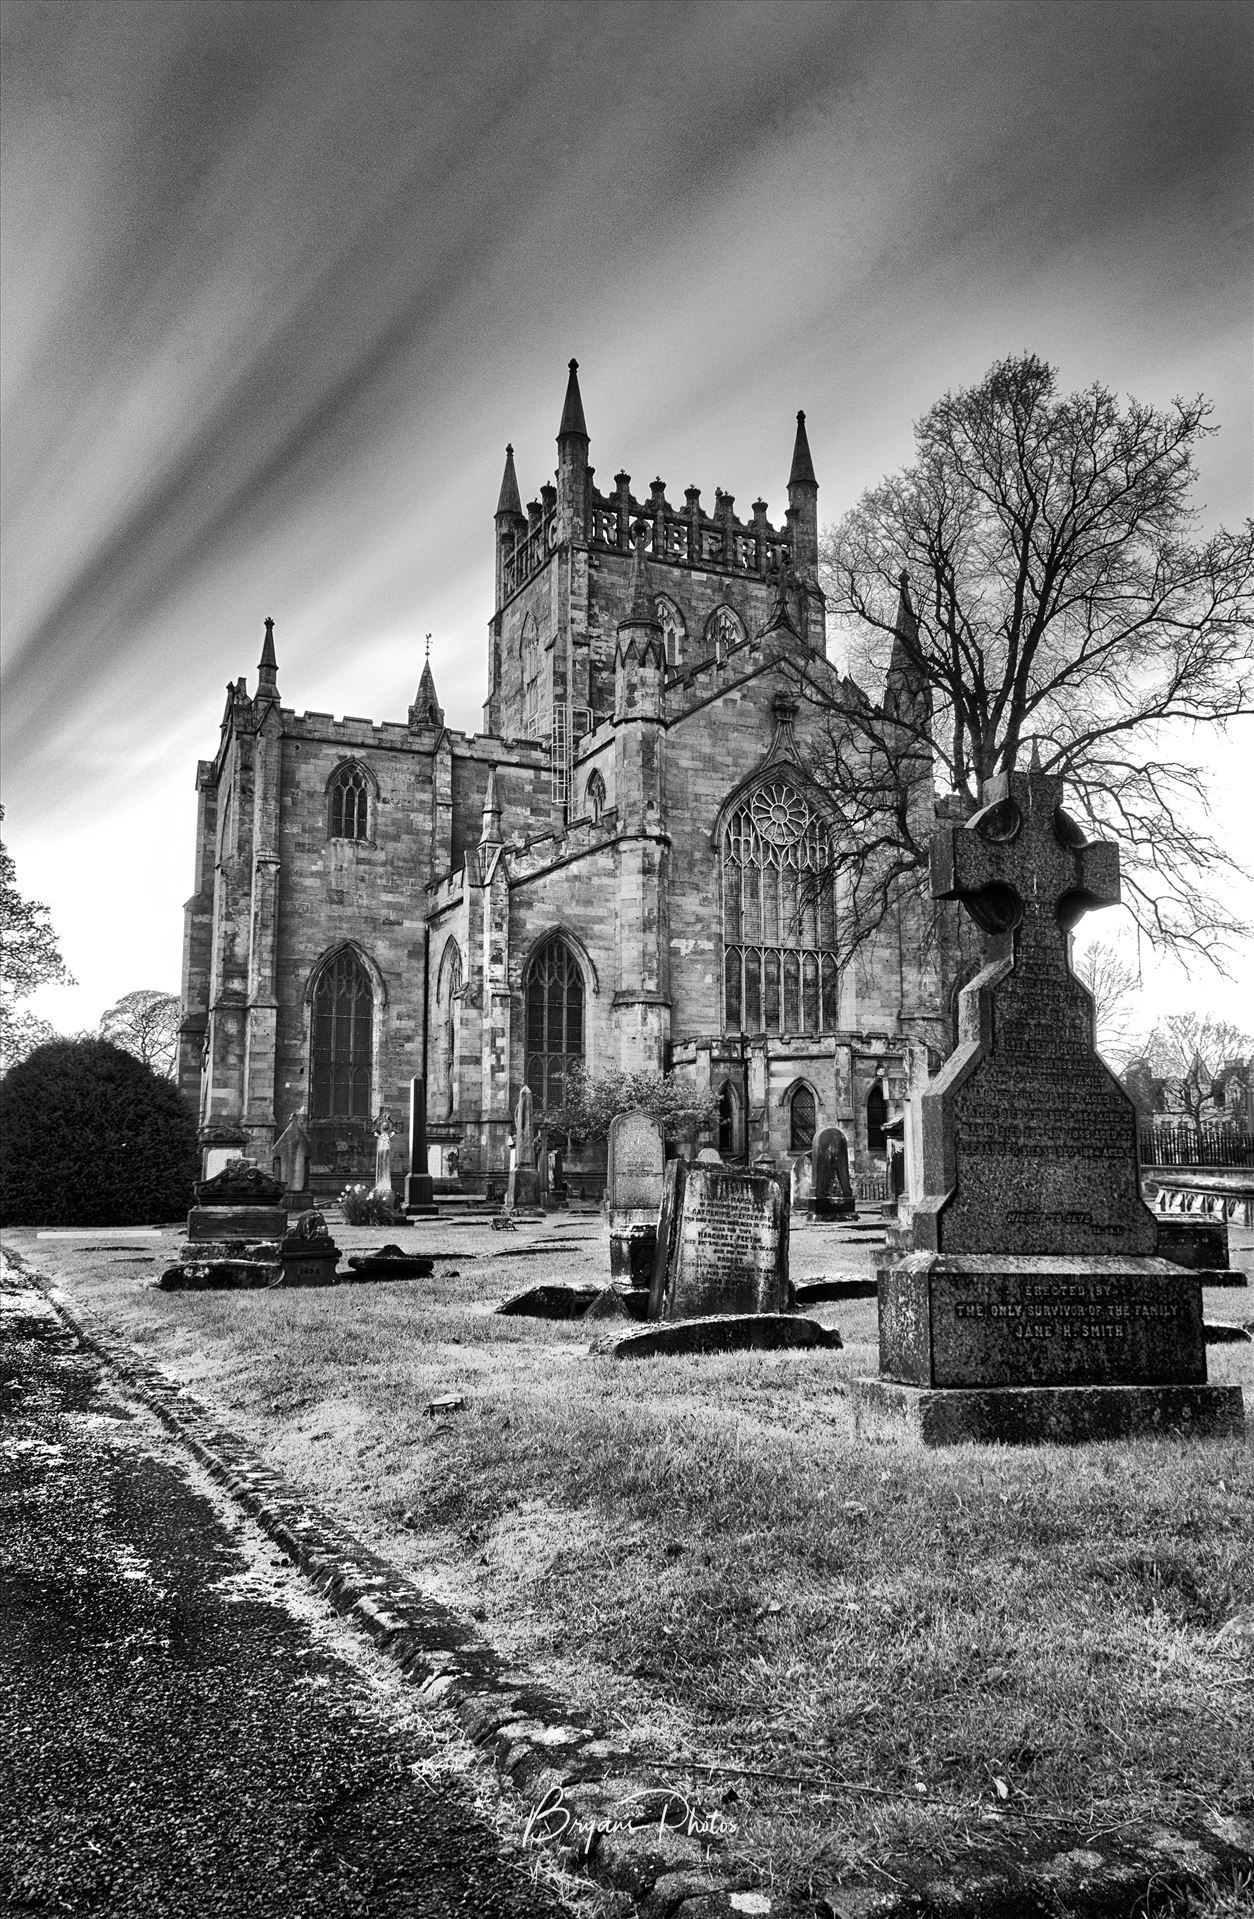 Dunfermline Abbey long exposure A long exposure photograph of Dunfermline Abbey in black and white by Bryans Photos